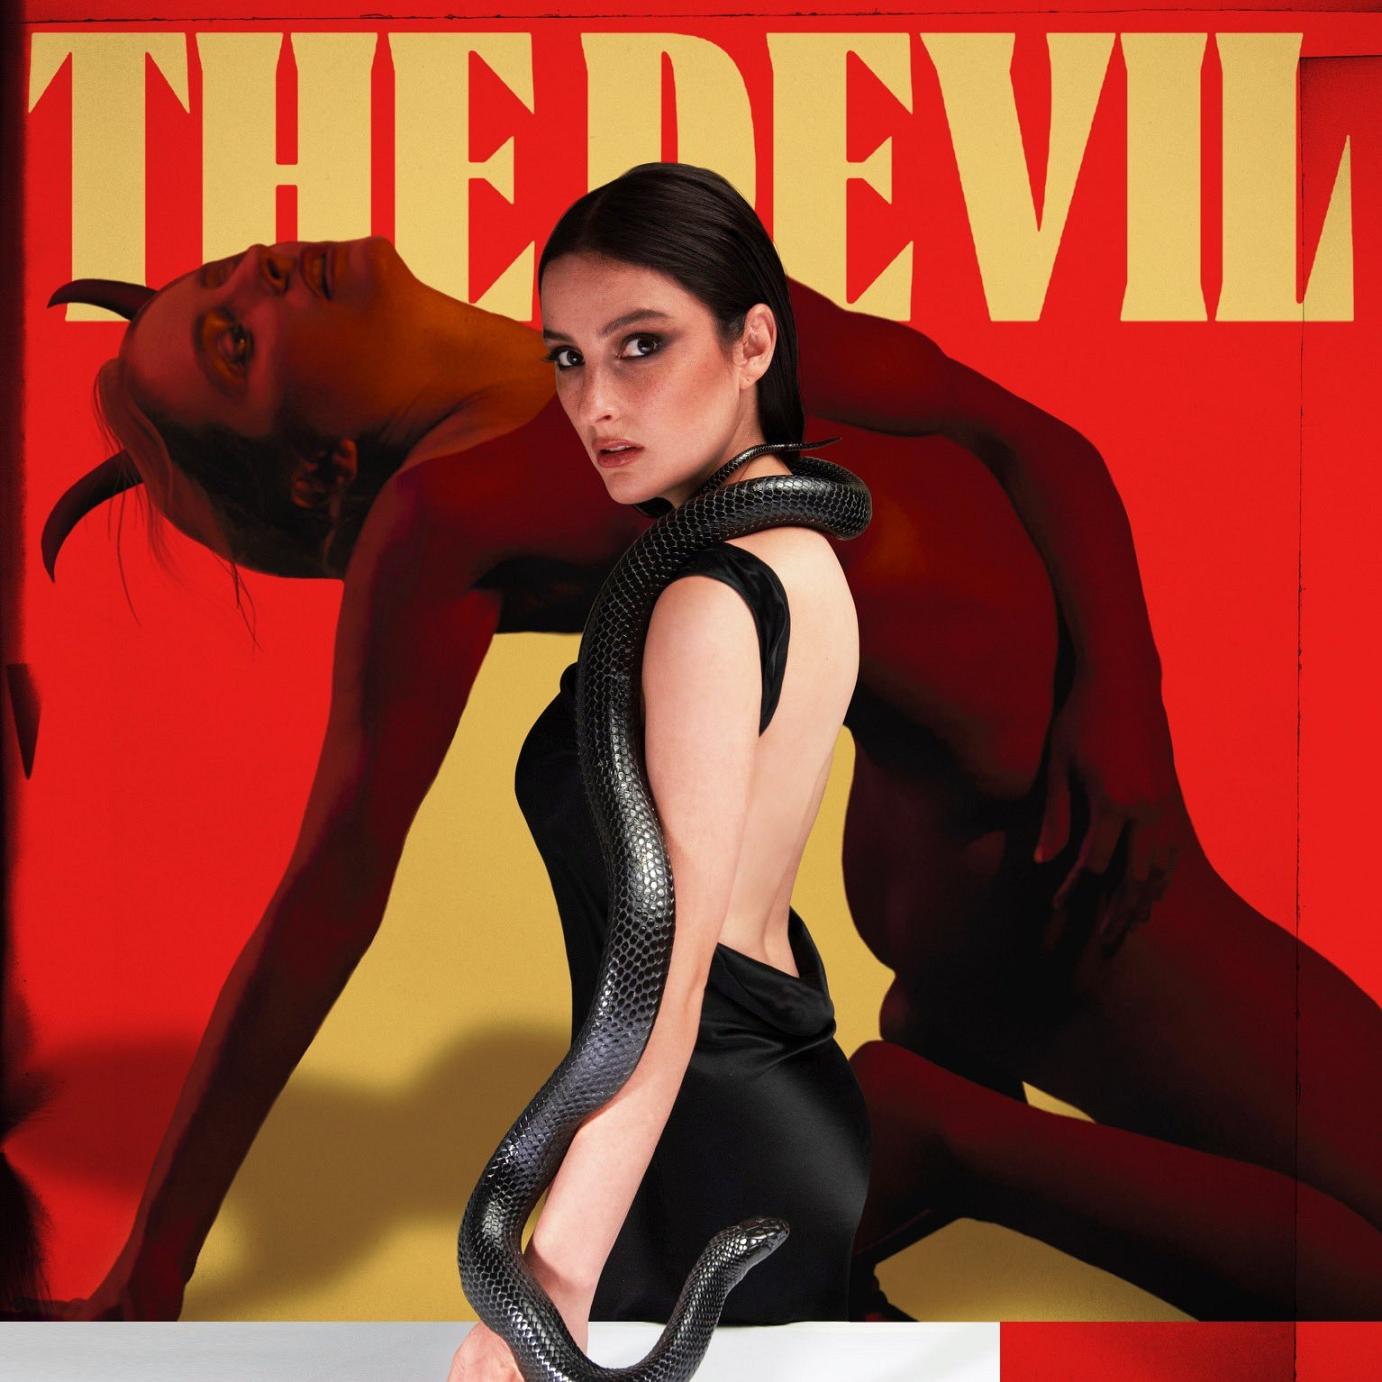 CoqCreative power by ProductionLink s.r.l. Banks The Devil single cover Banks-The-Devil-single-cover  Banks The Devil single cover